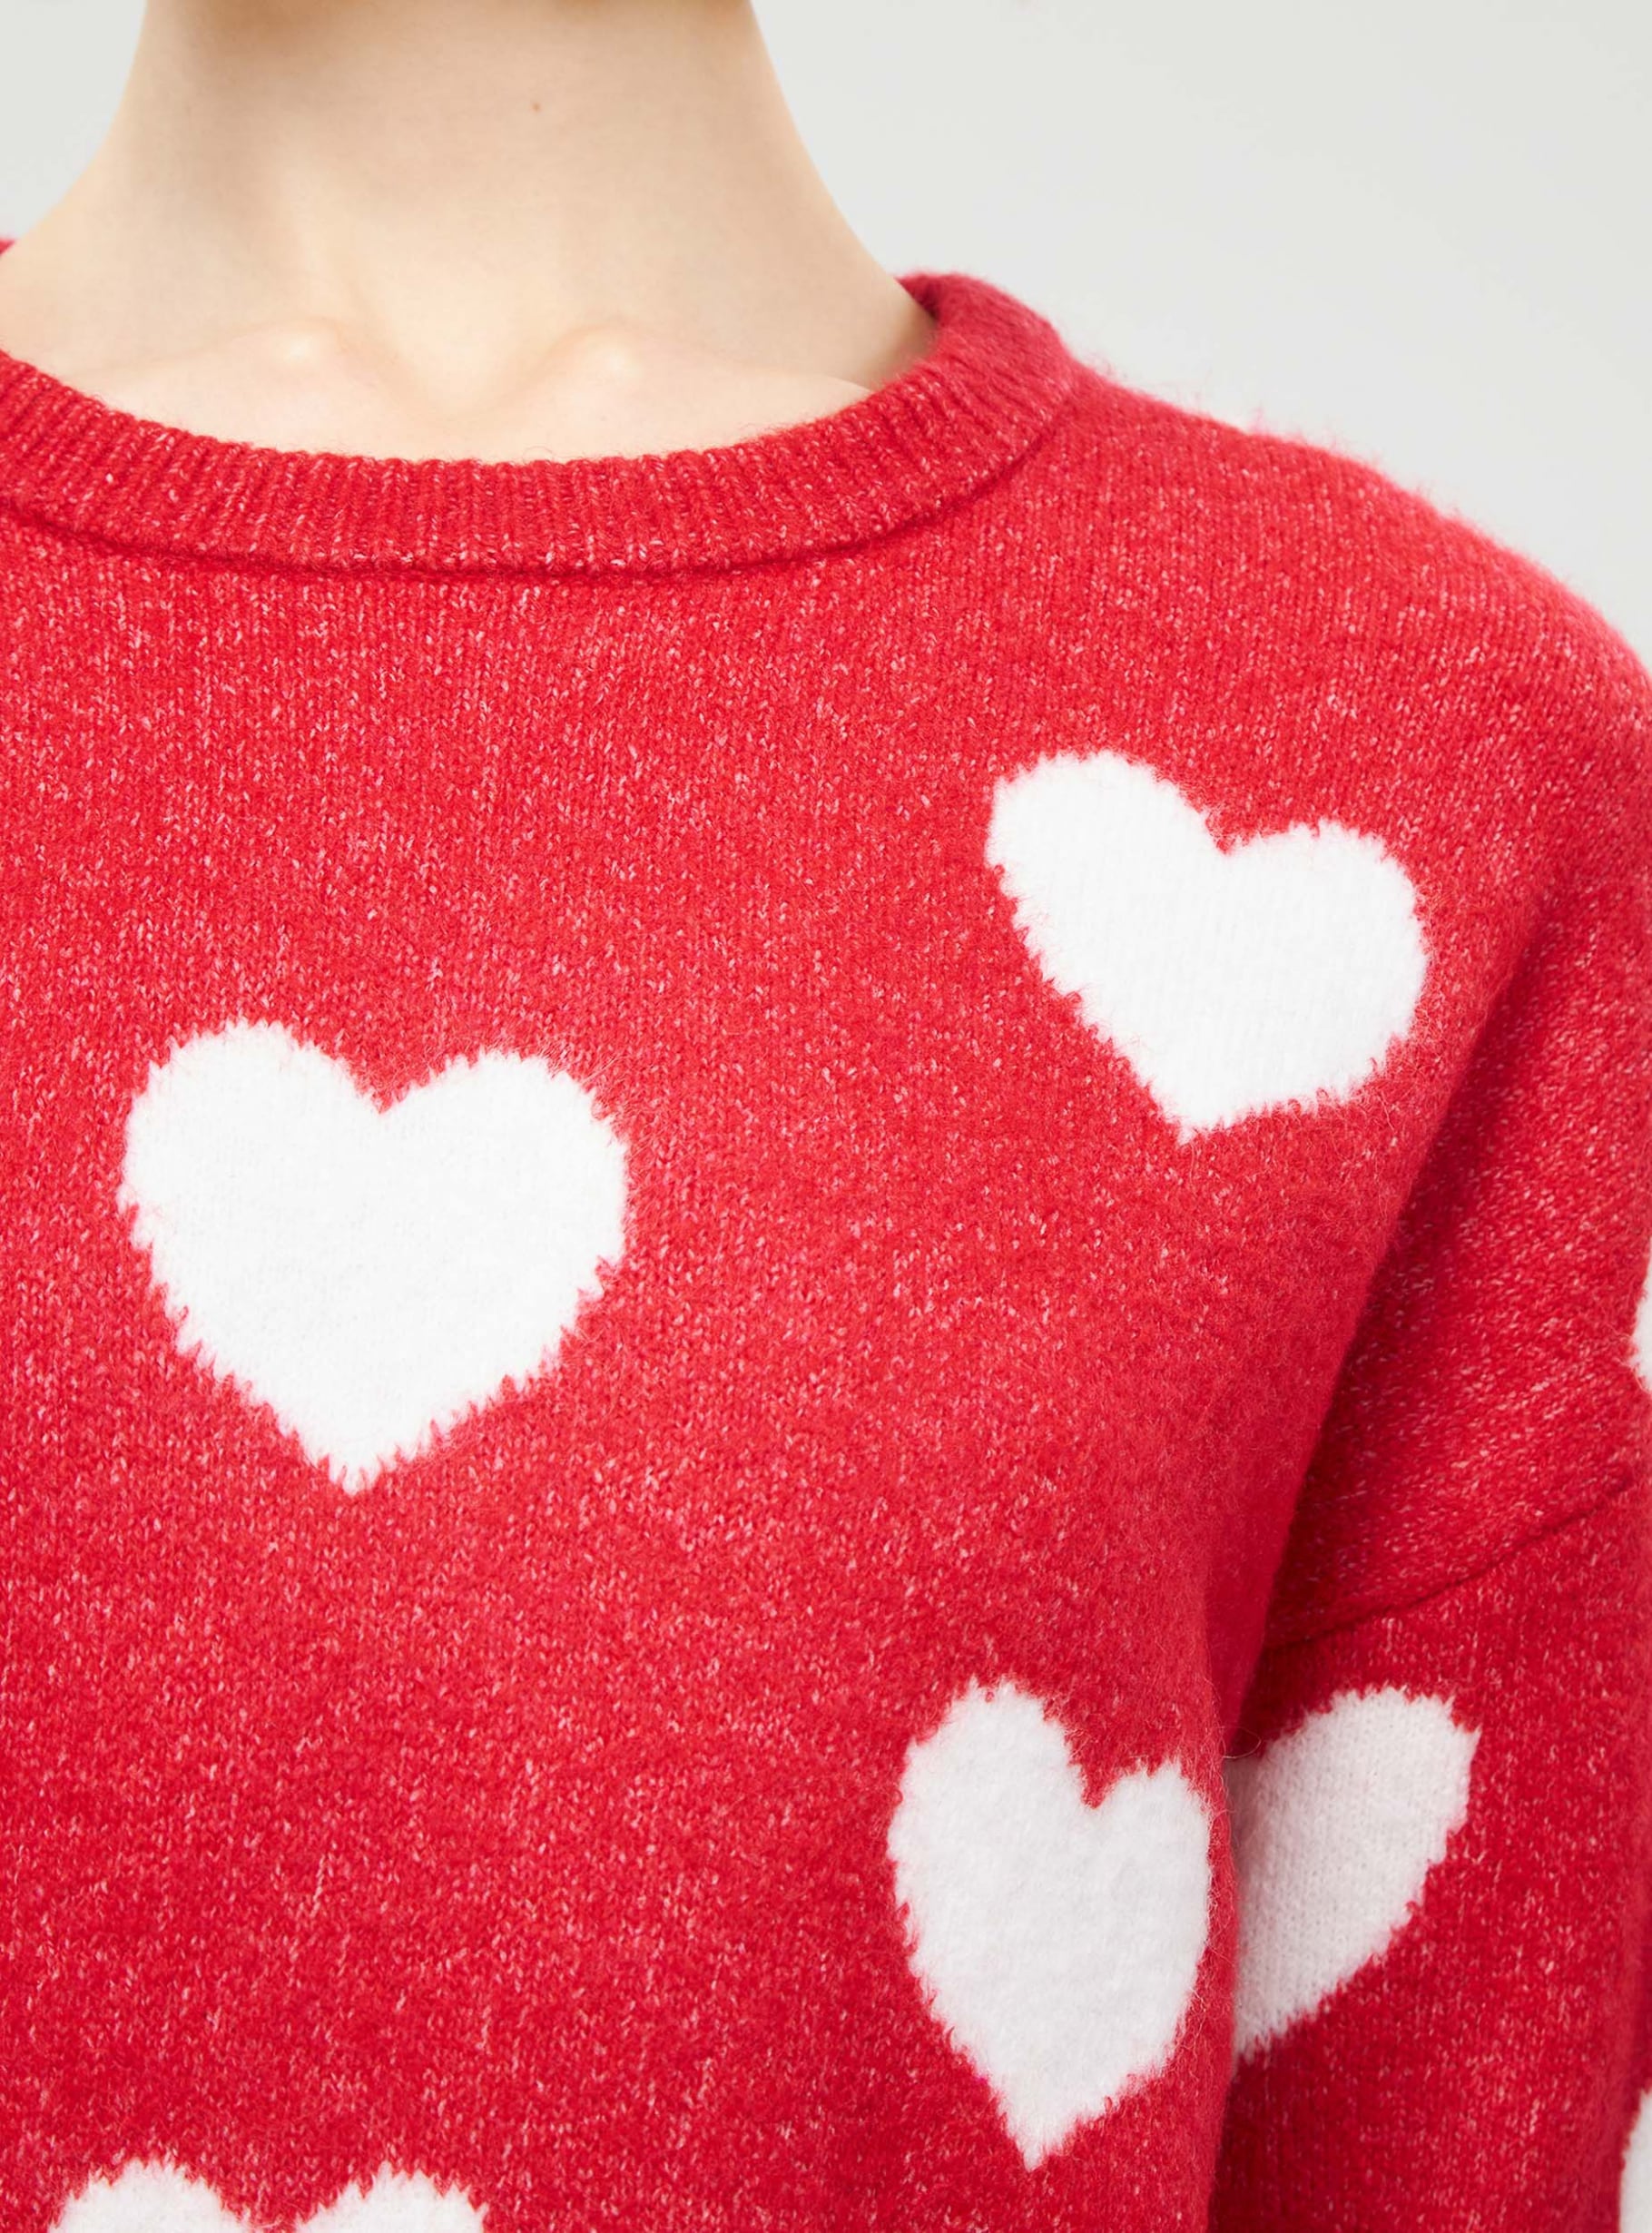 Red Crew neck sweater with heart pattern - Buy Online